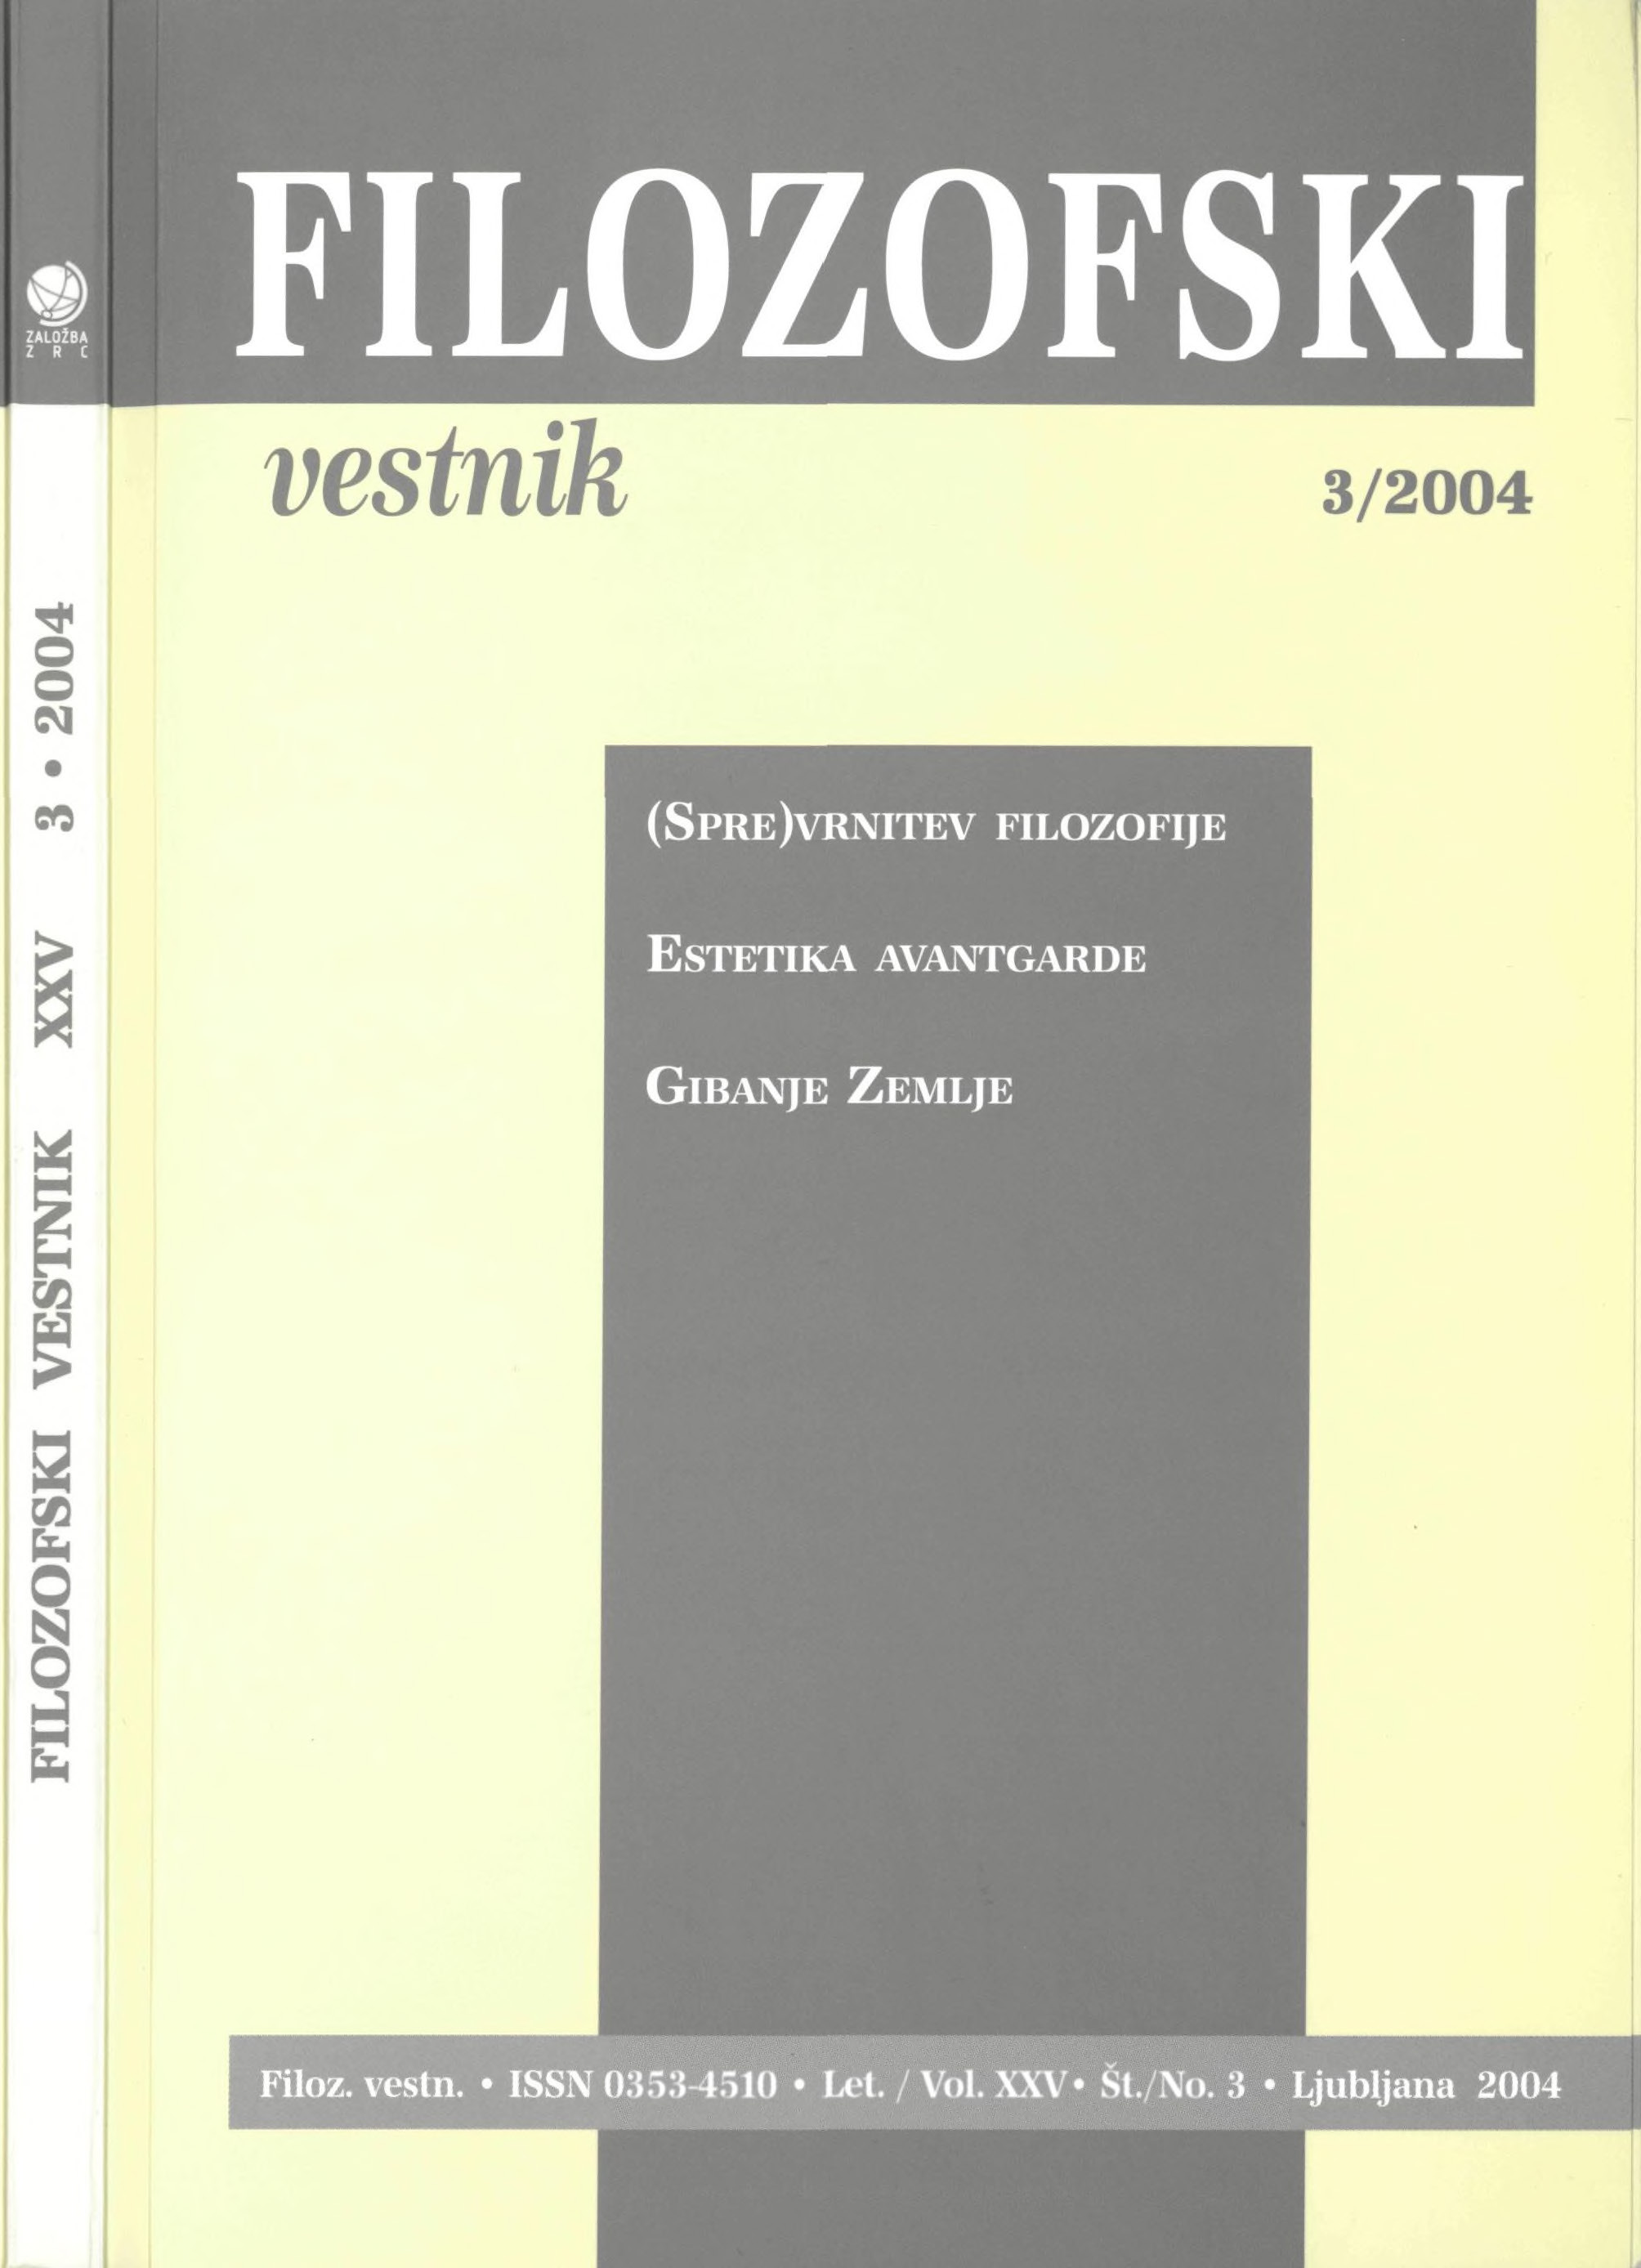 					View Vol. 25 No. 3 (2004): The (Re)turn of Philosophy, Aesthetics of the Avant-Garde, Movement of the Earth
				